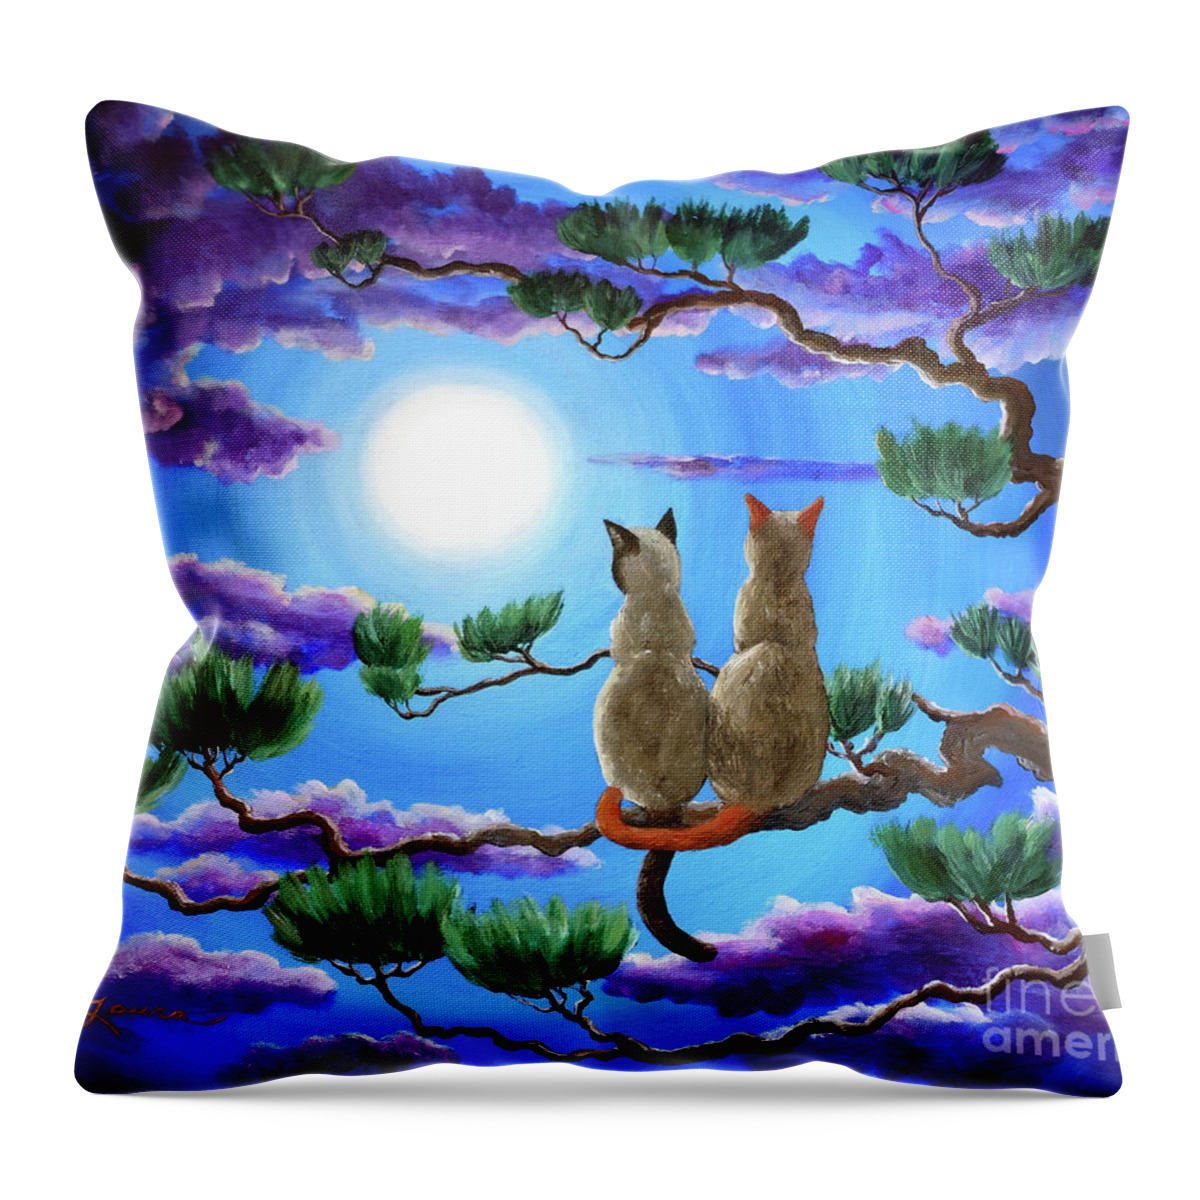 Zen Throw Pillow featuring the painting Alone in the Treetops by Laura Iverson